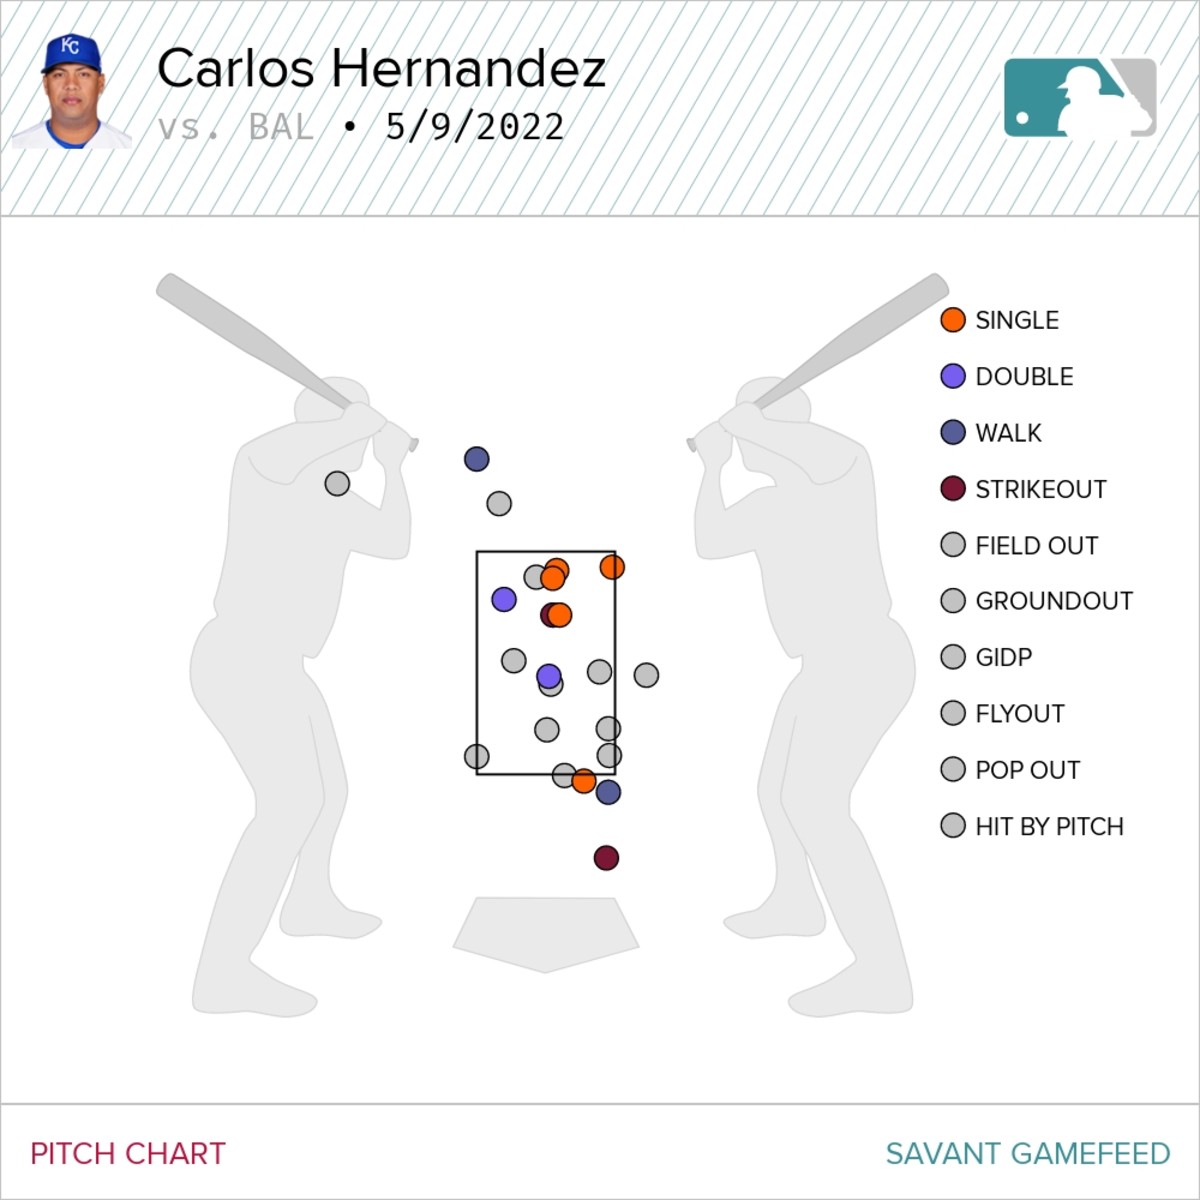 Carlos Hernandez's pitch chart against the Orioles, courtesy of Baseball Savant.